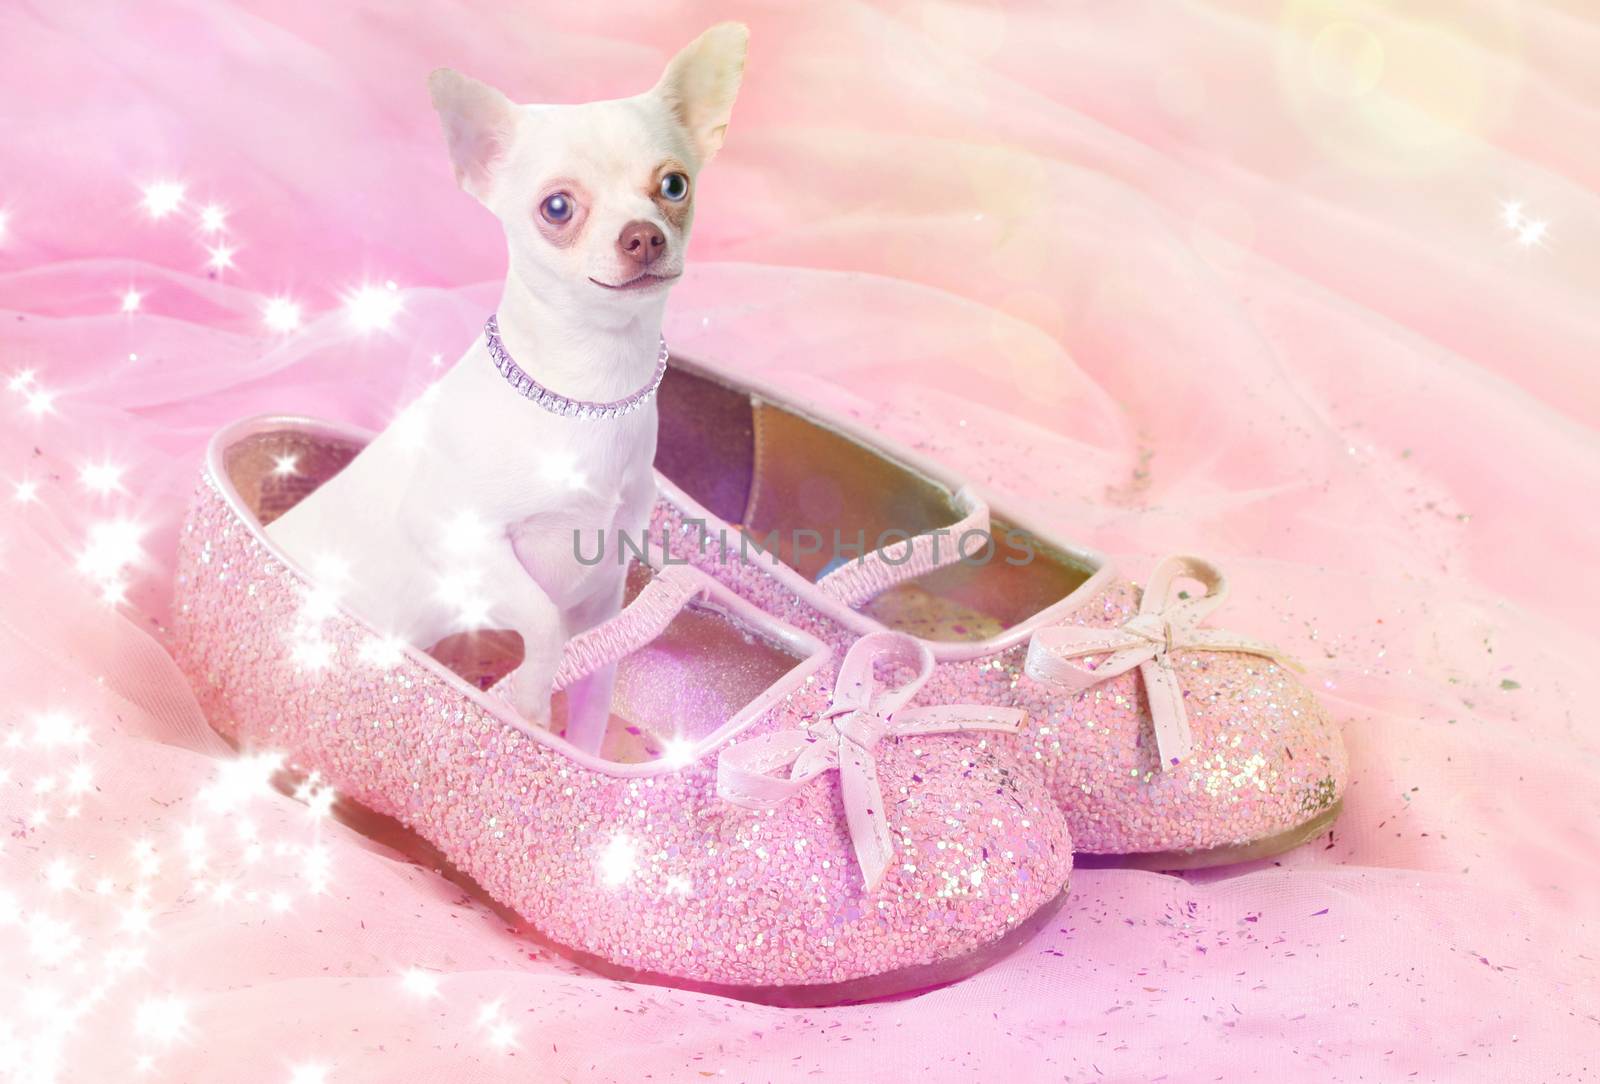 Chihuahua dog in pink glittery shoe by gvictoria